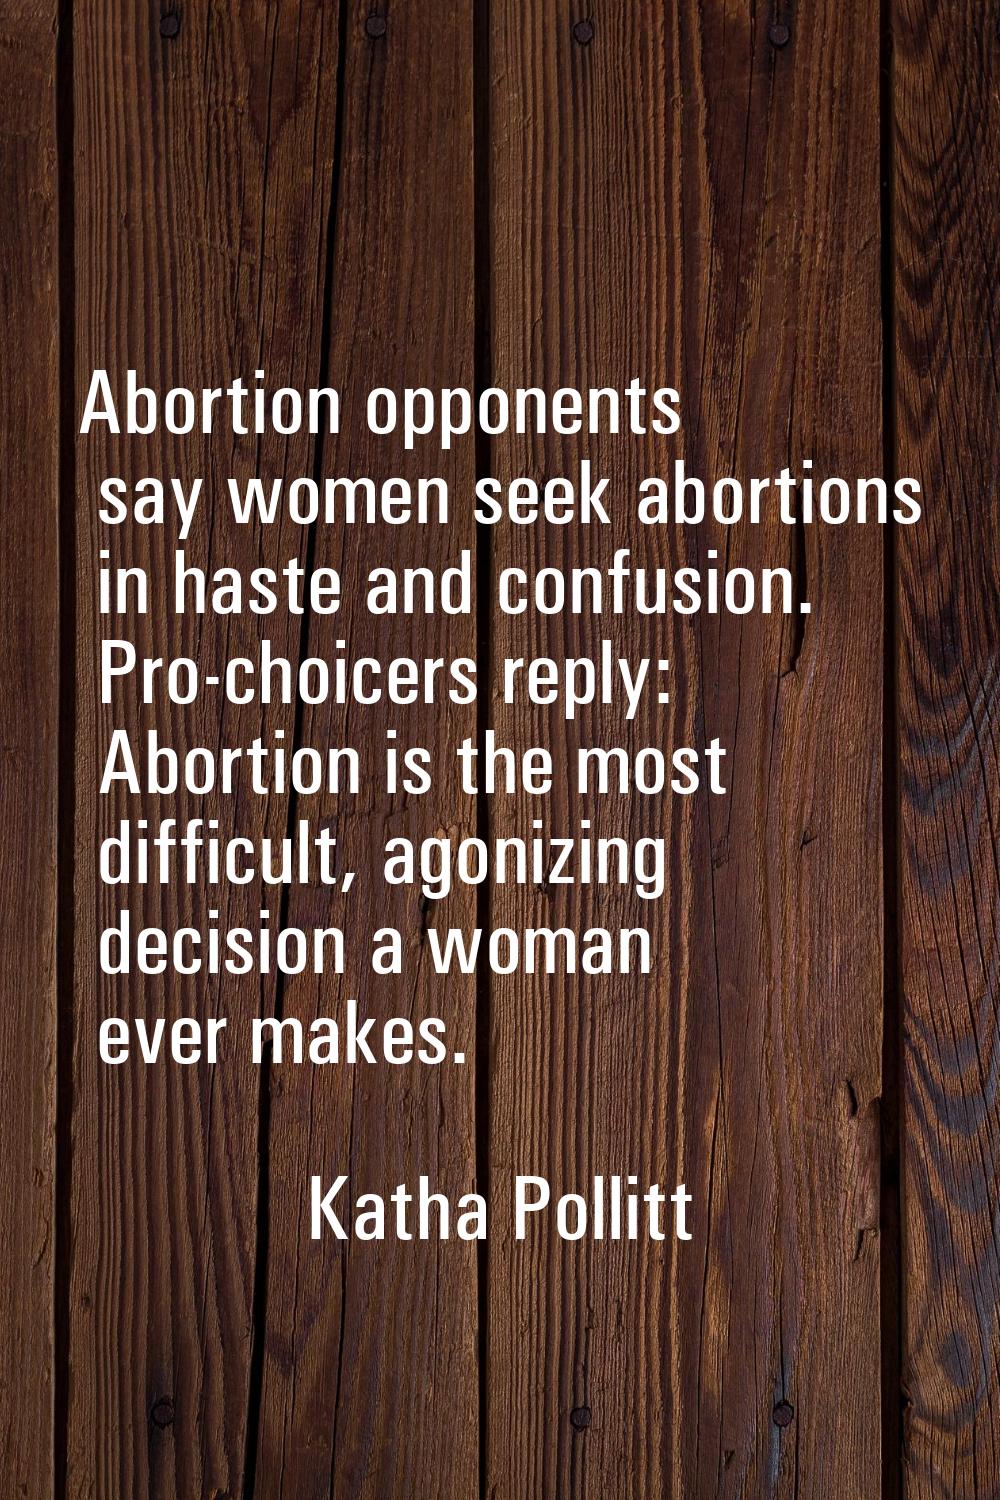 Abortion opponents say women seek abortions in haste and confusion. Pro-choicers reply: Abortion is